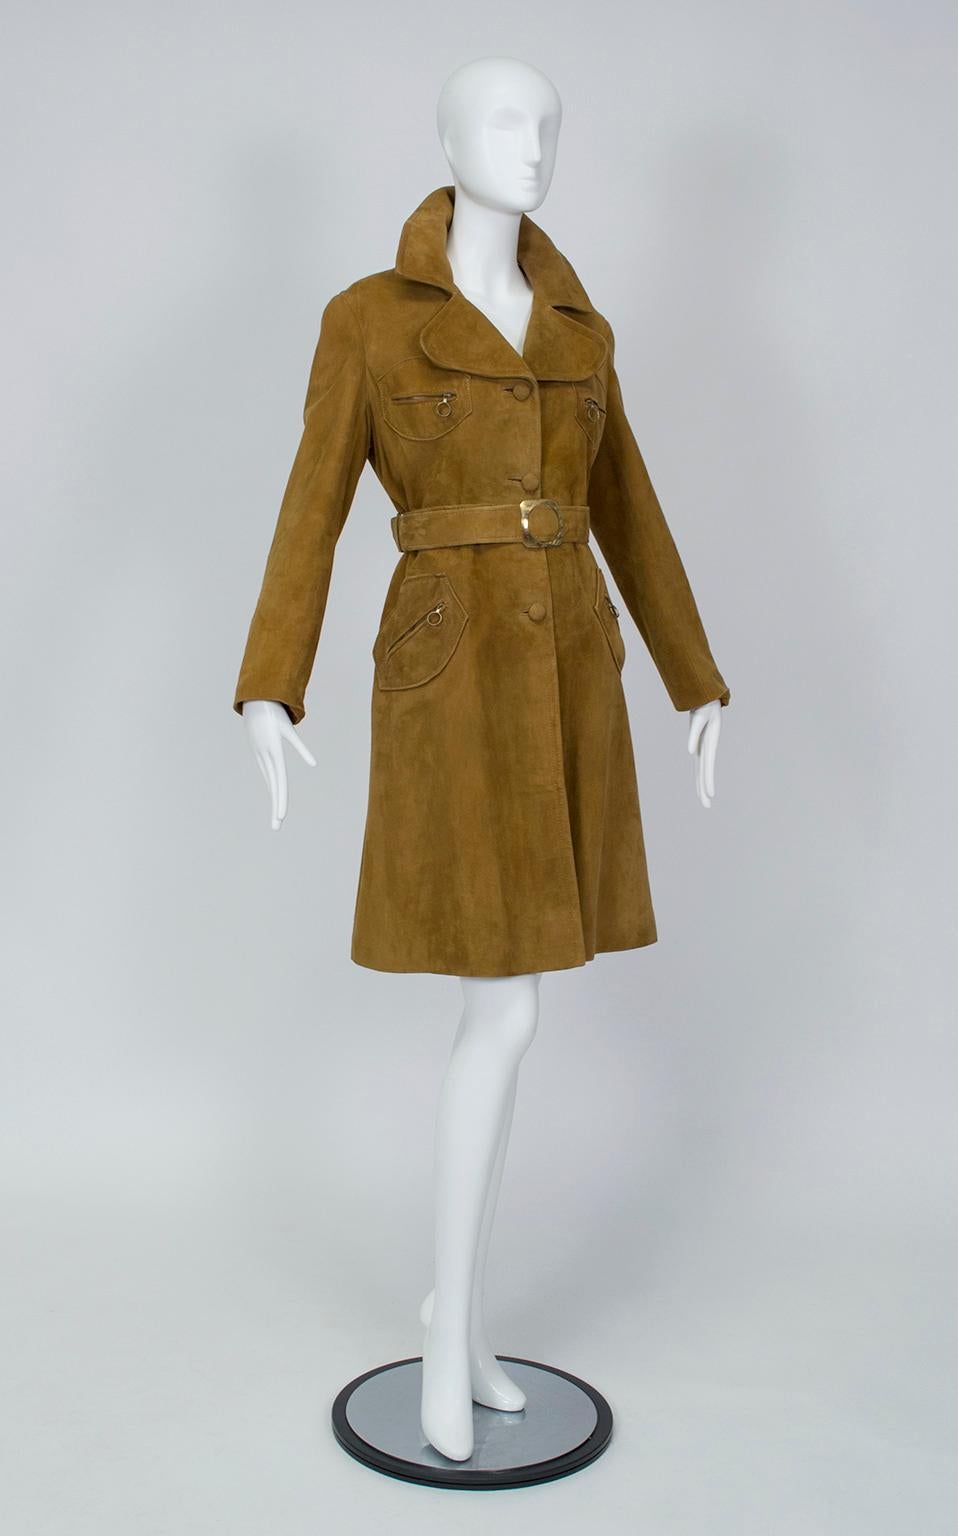 With its Mod cutout brass buckle and zippered pockets (with round pull rings!), this coat will have you channeling Françoise Hardy in a New York (or Paris) minute. Pair with block heel boots, a floppy hat and an acoustic guitar for maximum